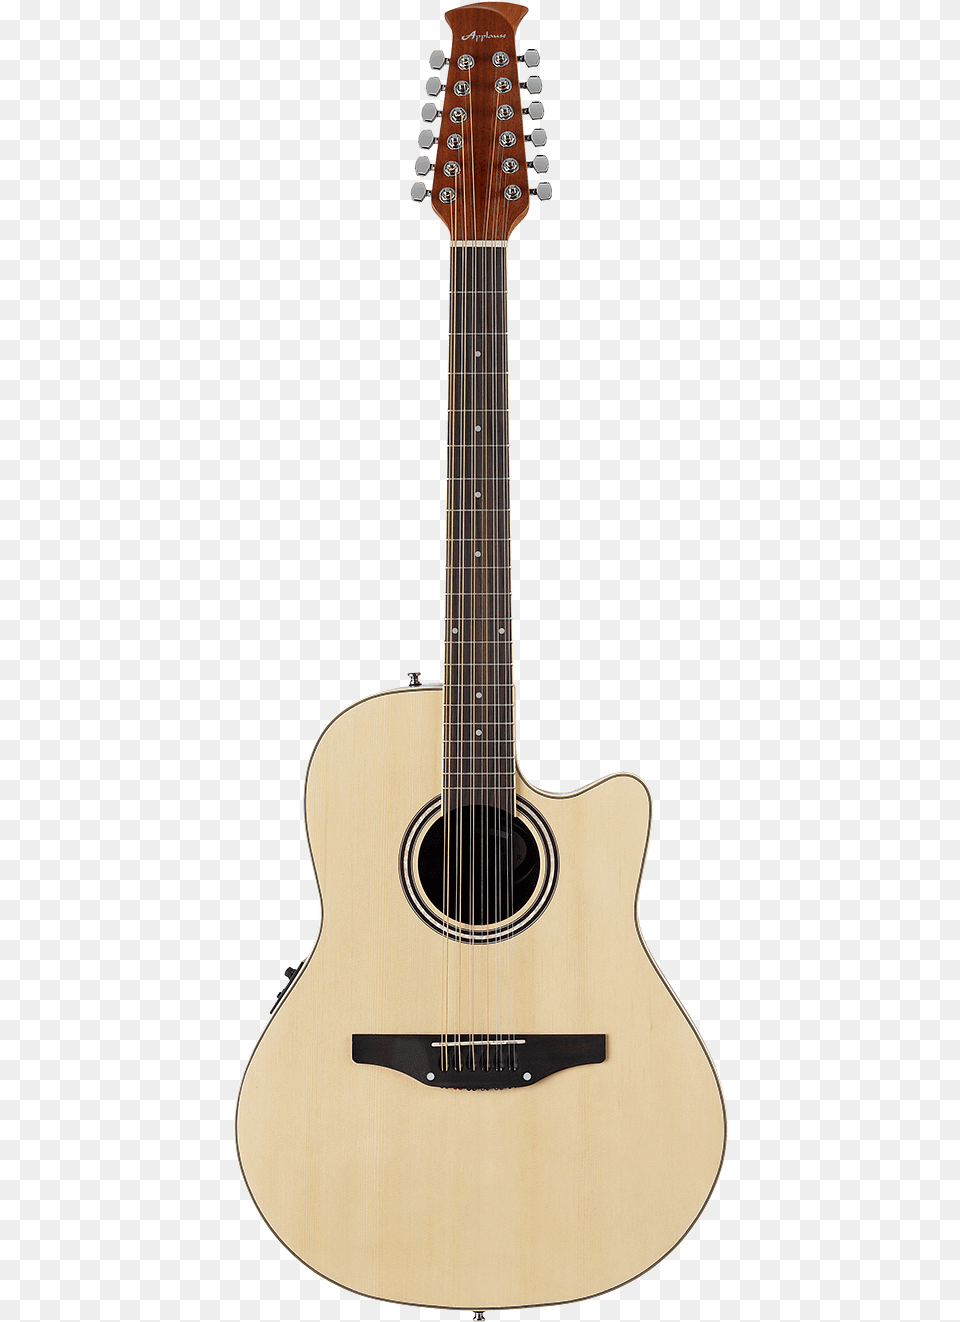 4 Applause Standard 12 String Supro Guitar, Musical Instrument Free Transparent Png